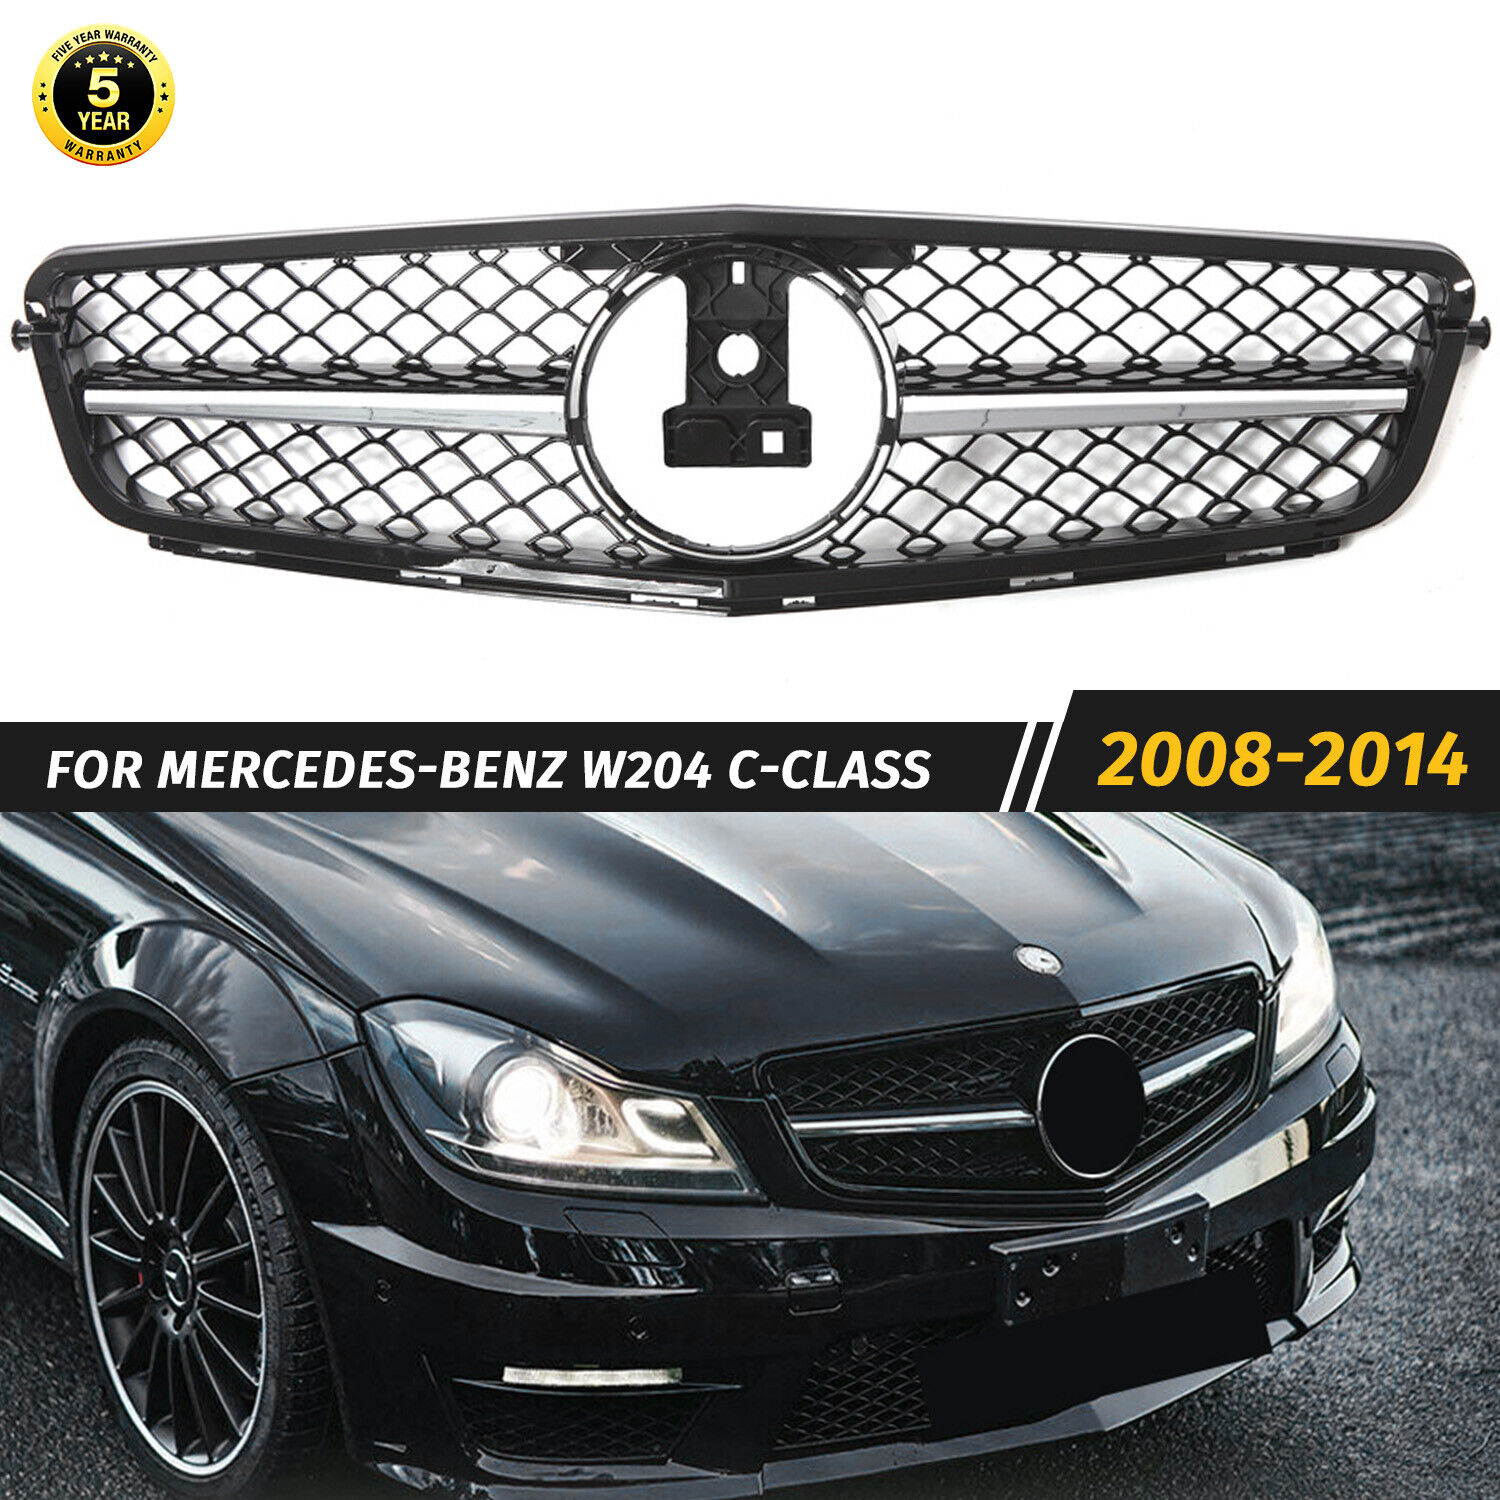 Black AMG Style Grille For Mercedes Benz C Class W204 C180 C350 C250 2008-2014